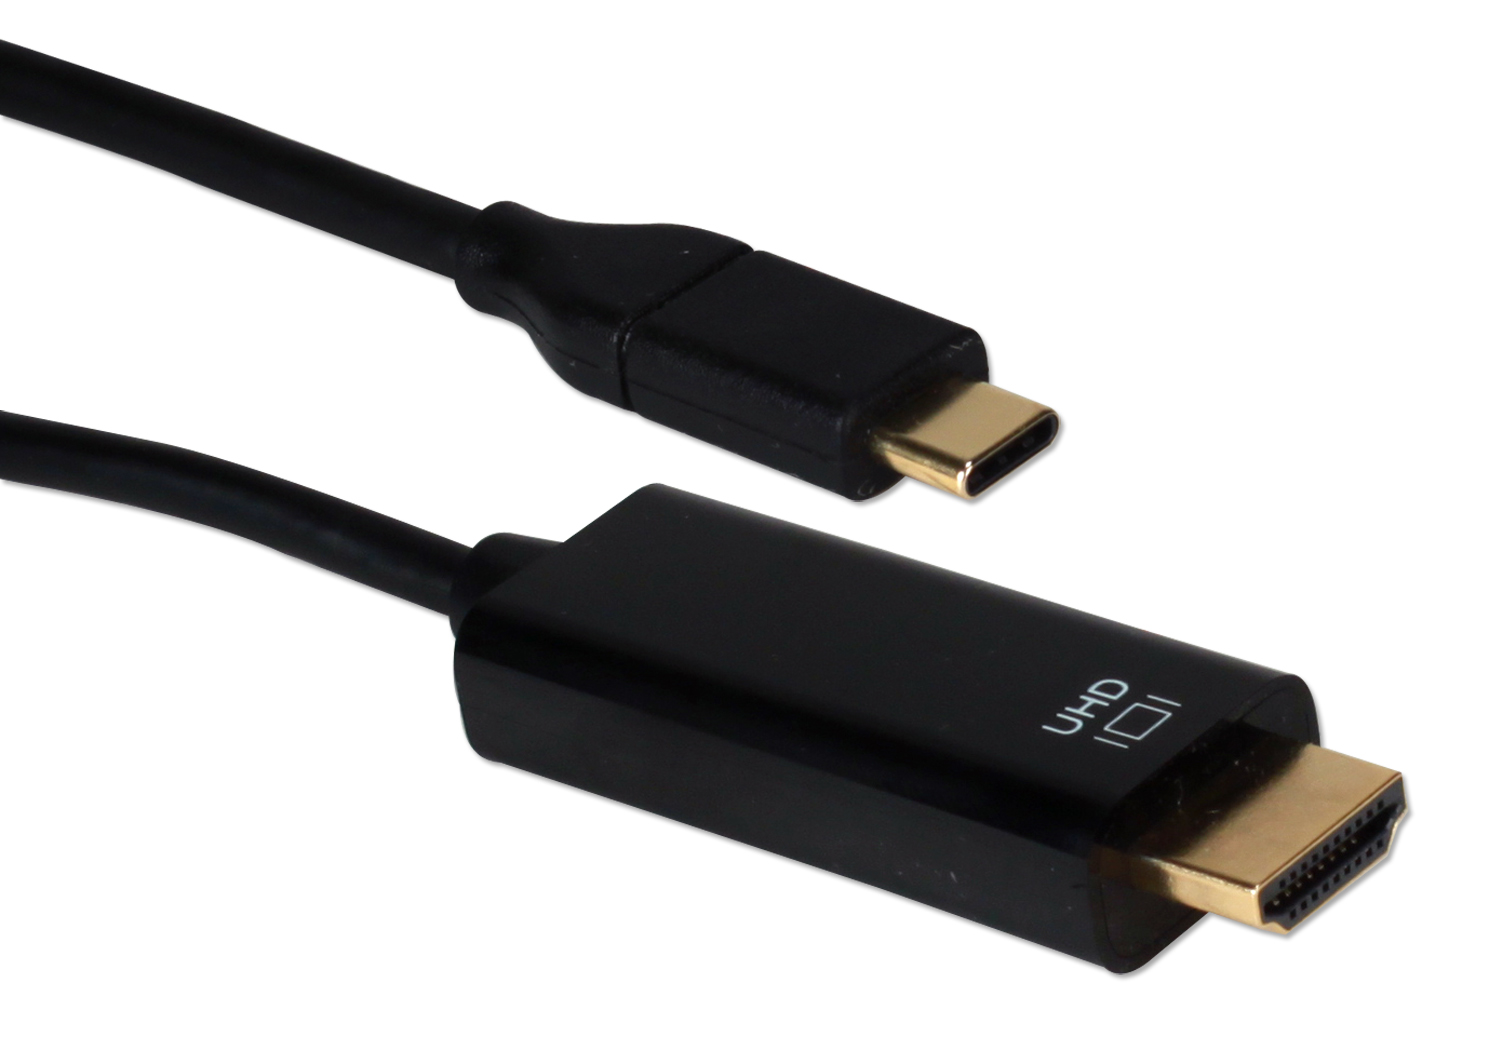 USBCHD-15 - 15ft USB-C / 3 to HDMI Converter Cable